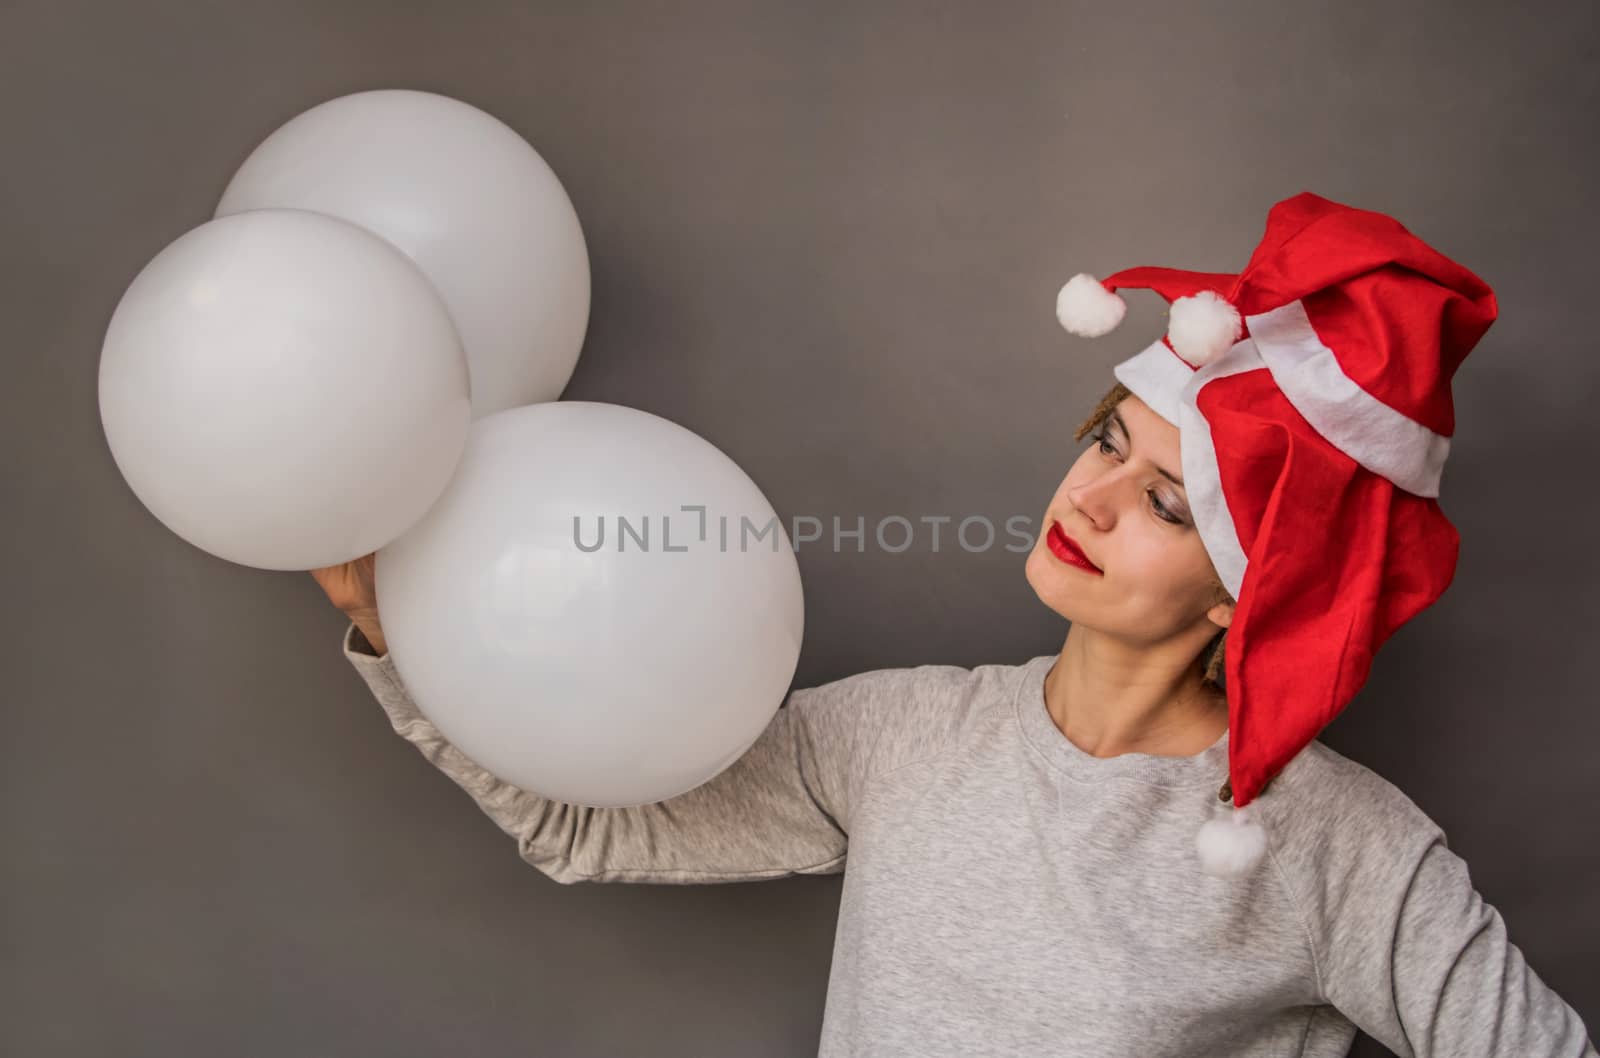 smiling womanwith red lips in santa hats with tree white balloons on grey background